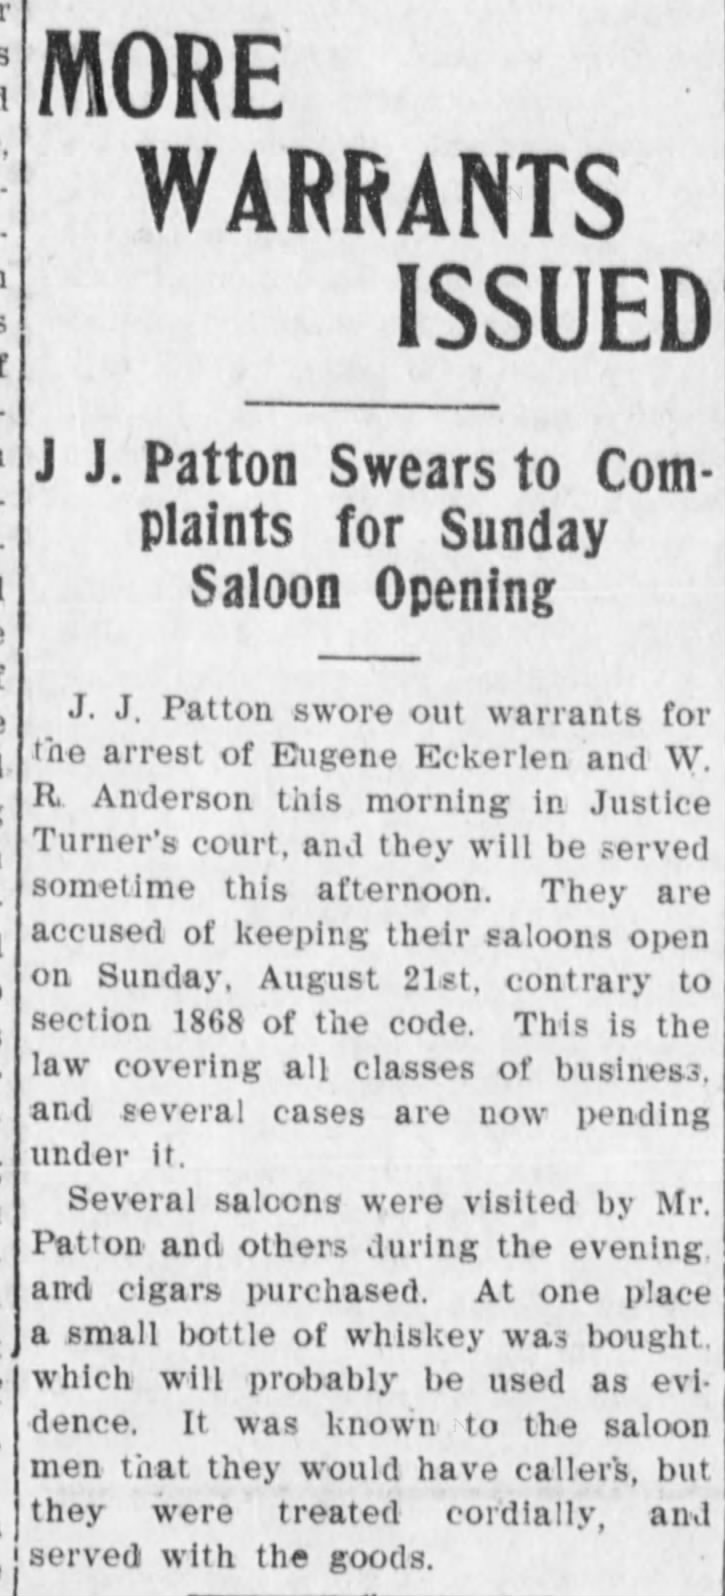 JJ Patton Swears to Complaints for Sunday Saloon Opening